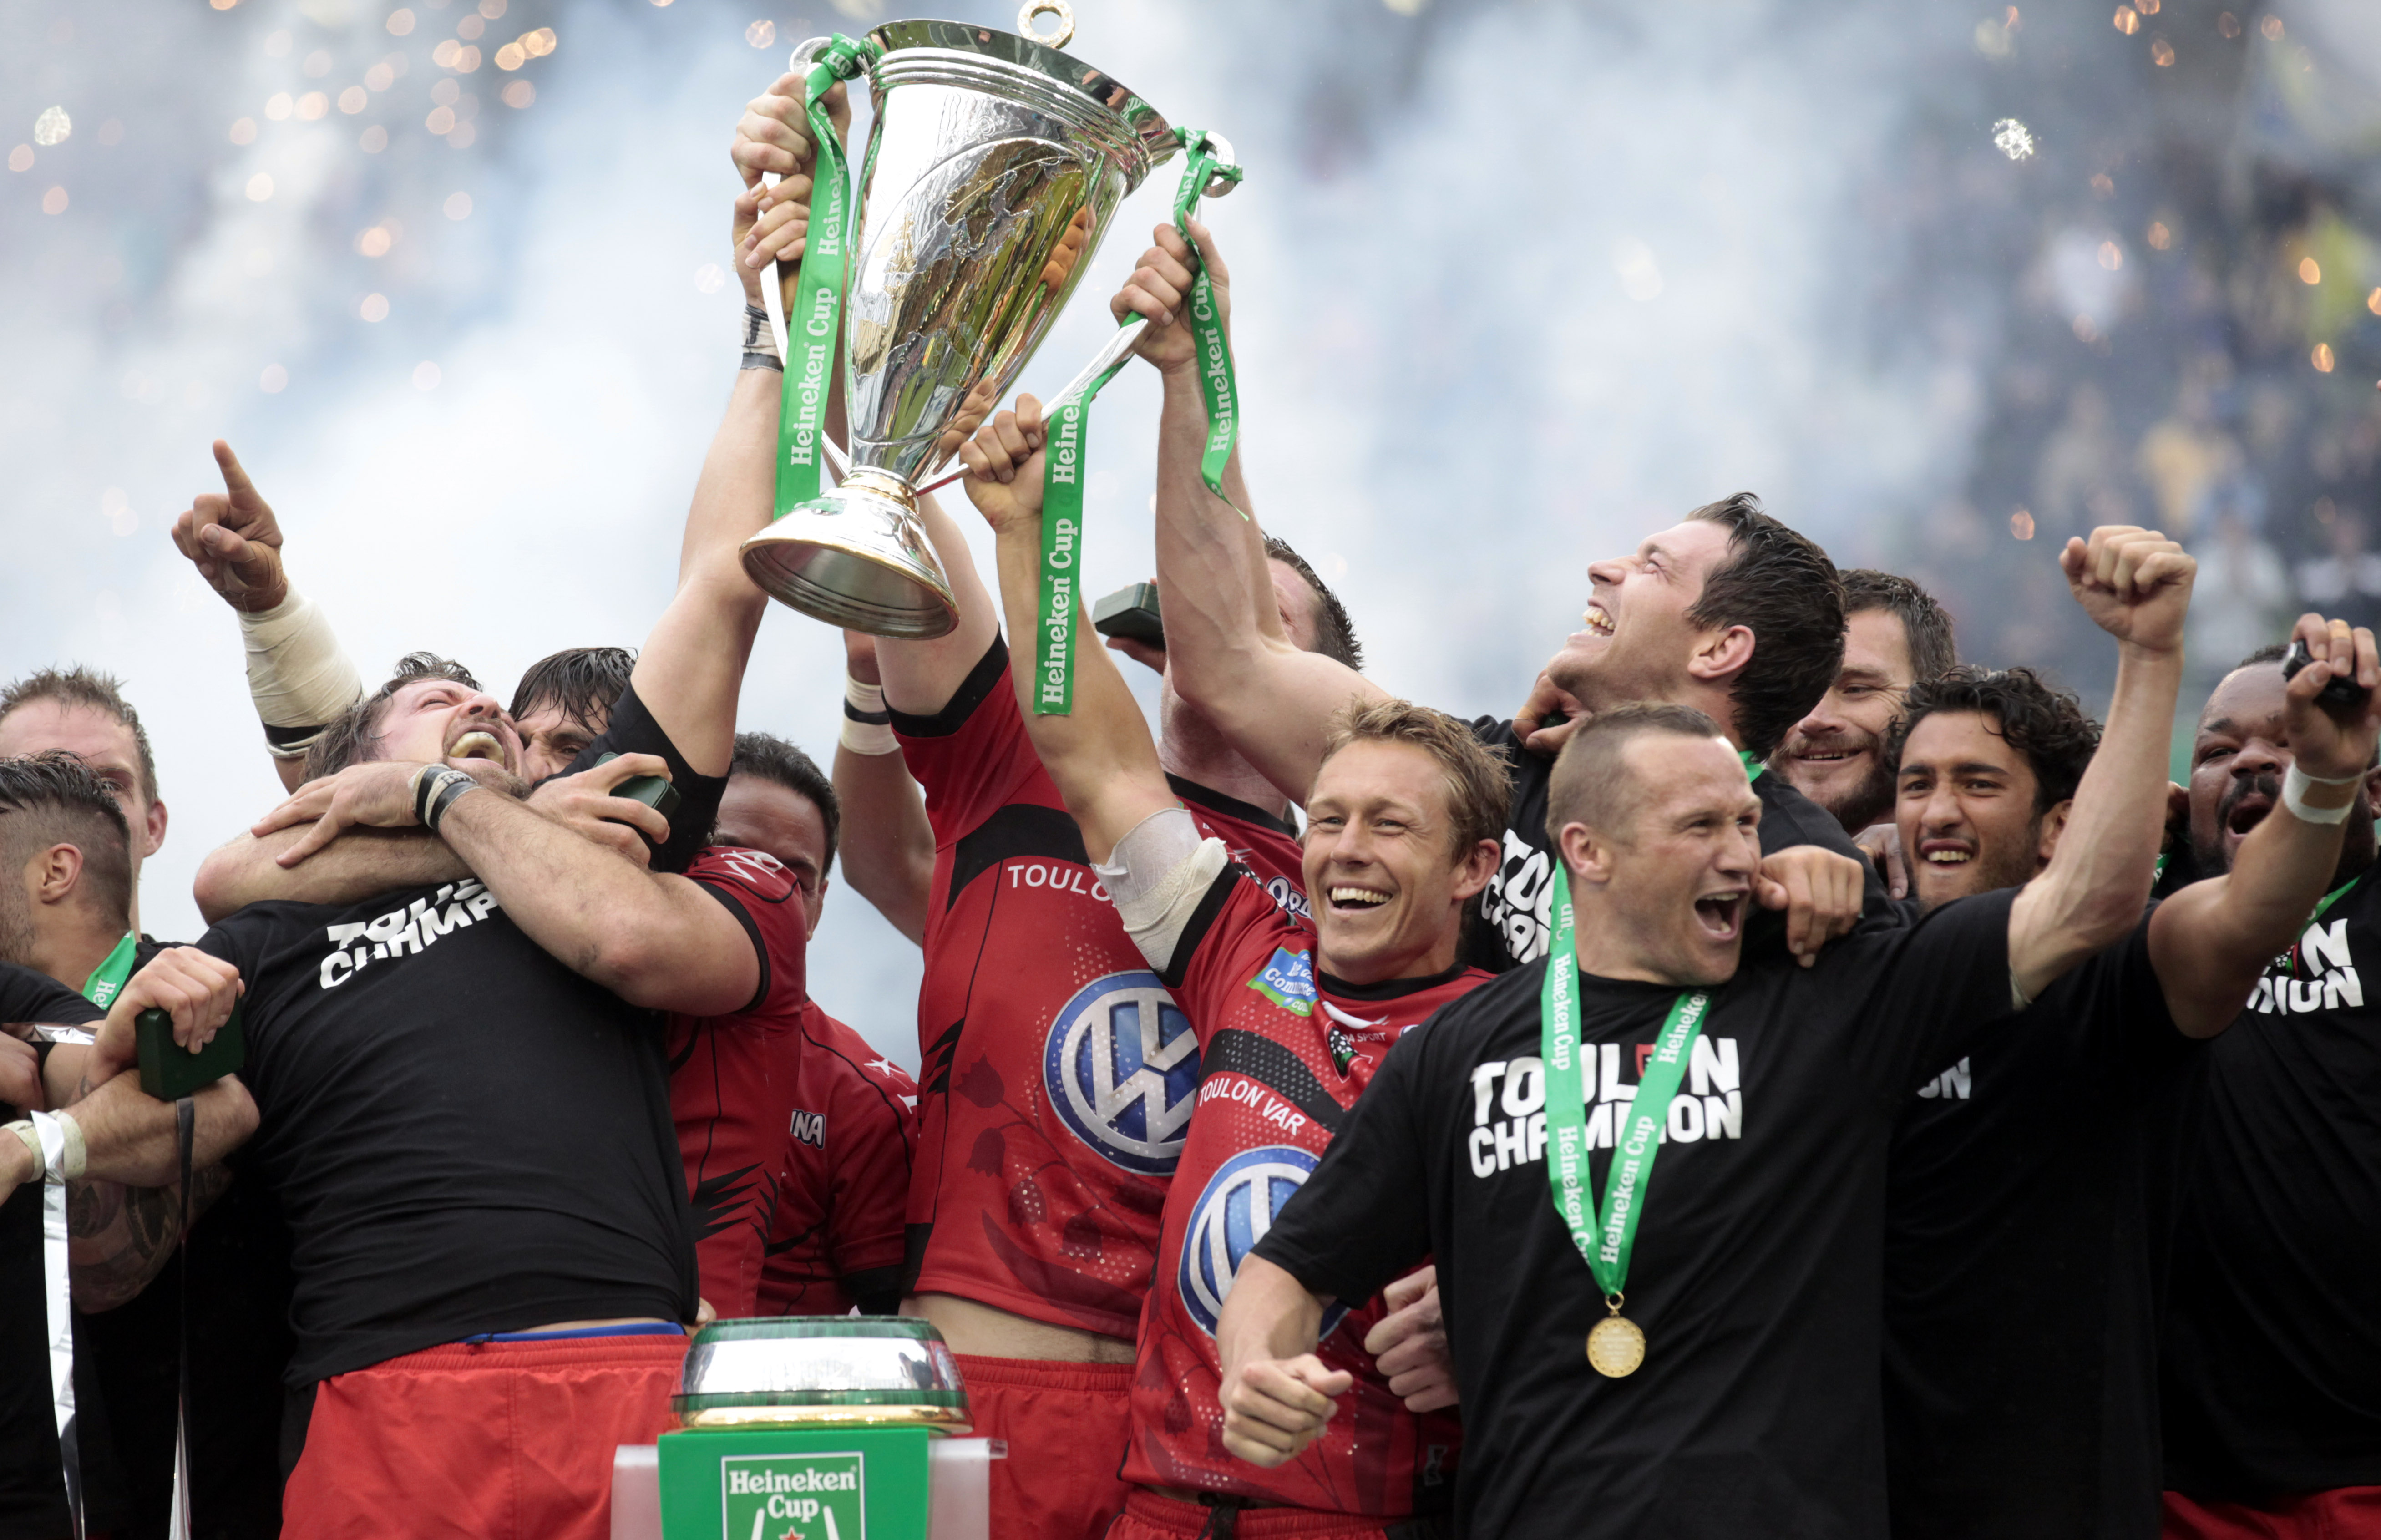 Toulon are European Rugby Champions Cup holders and boast a star-studded stable of international players. Photo: AP